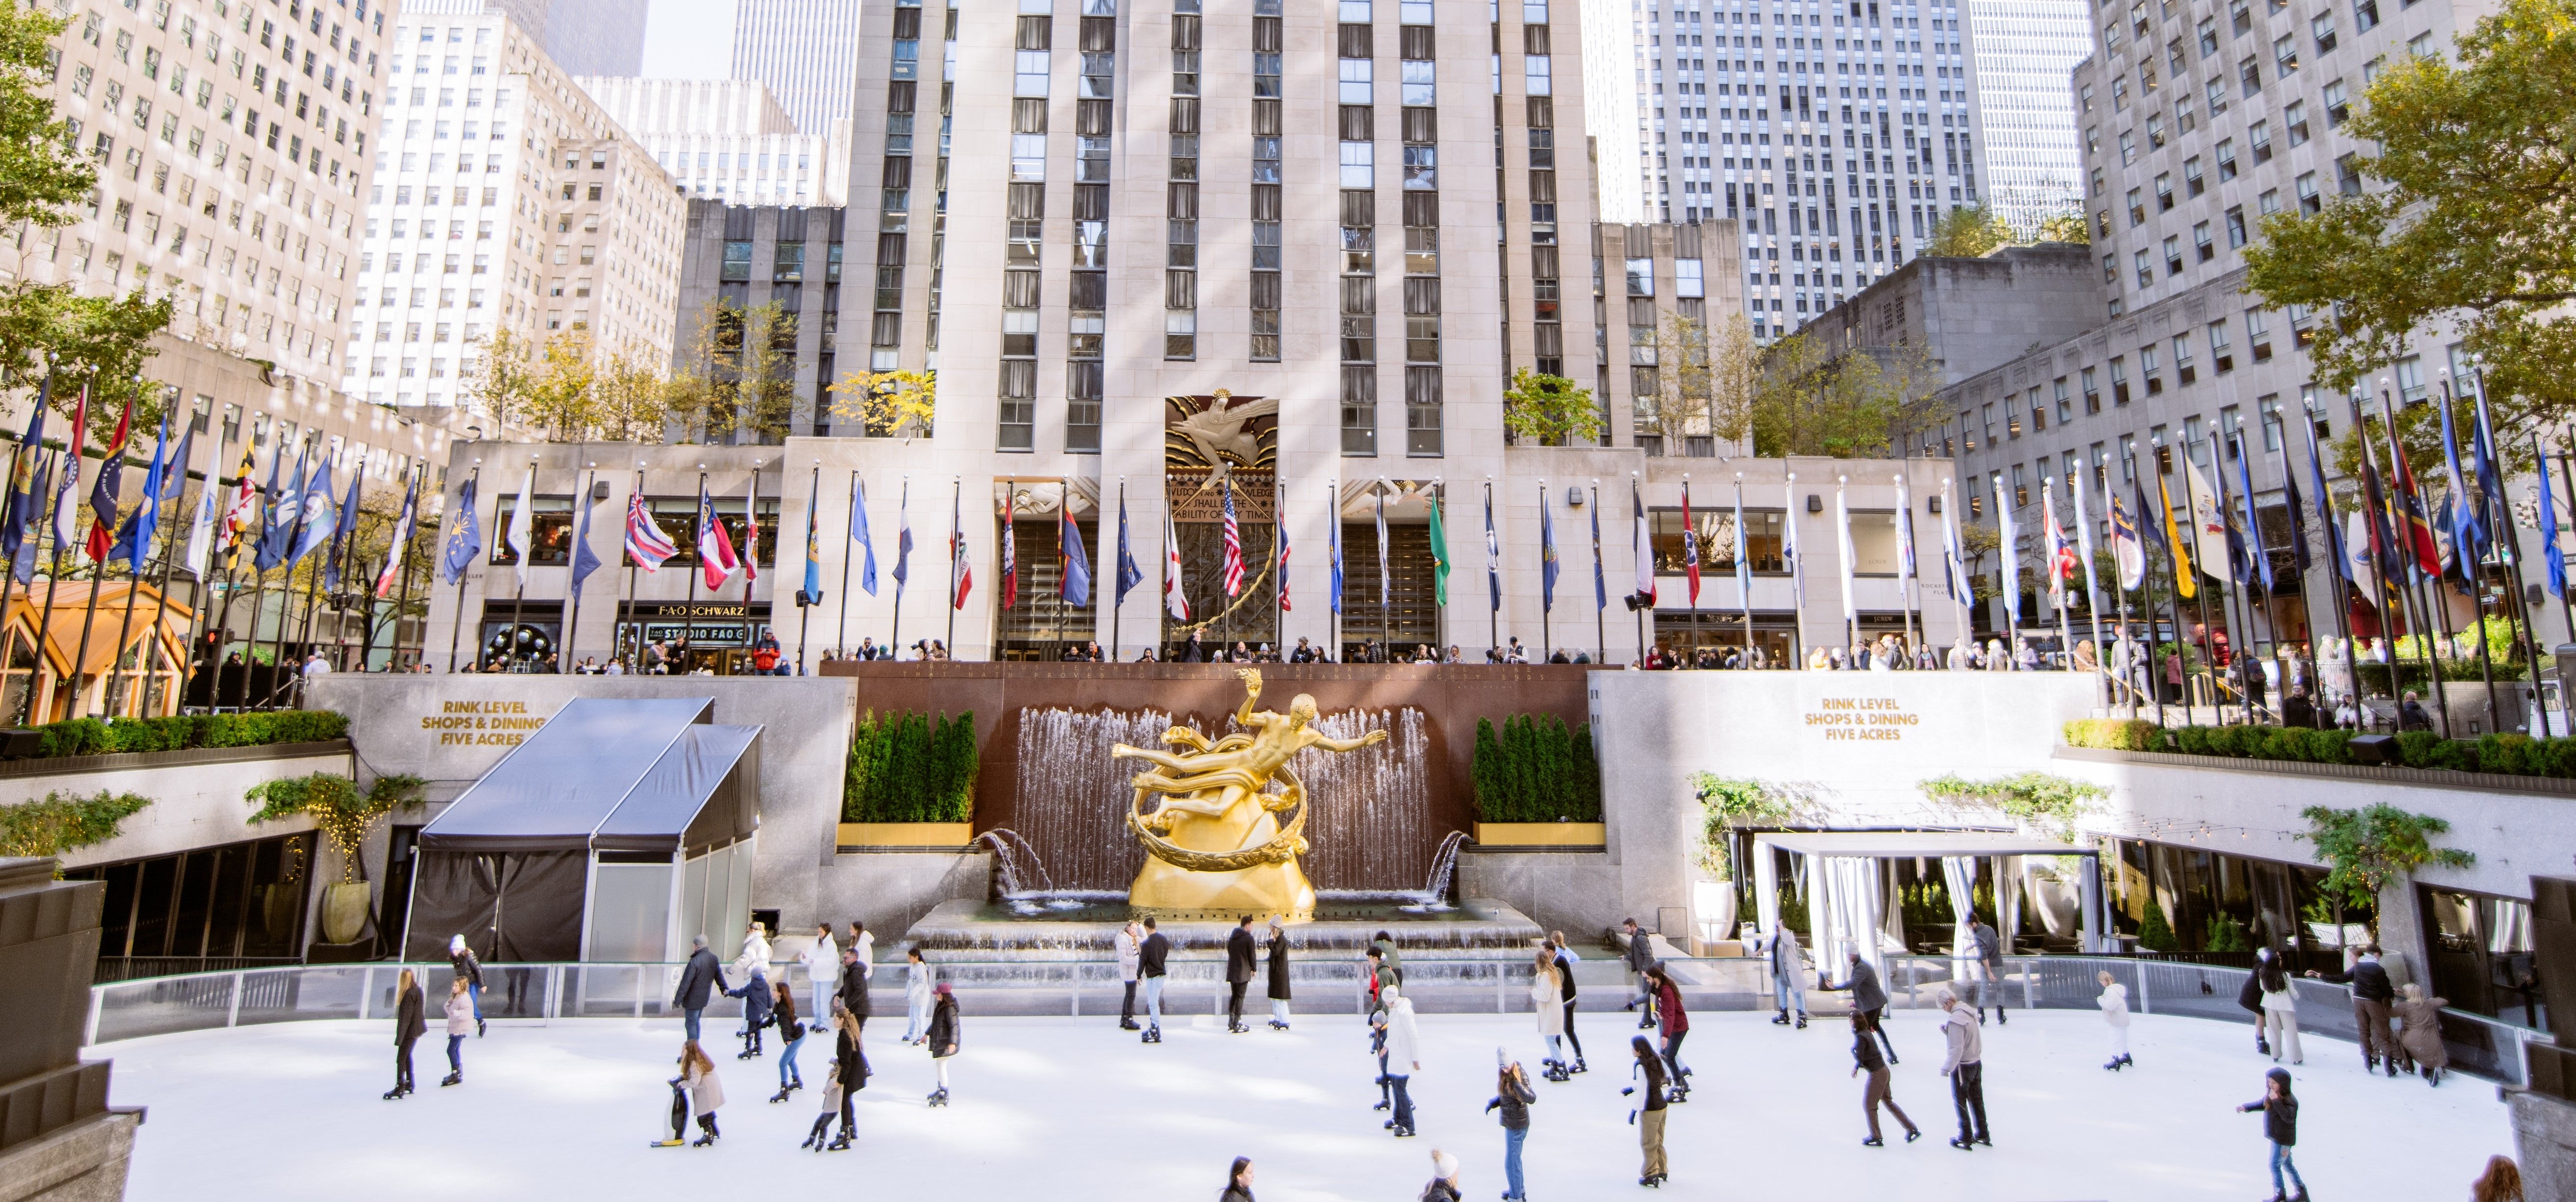 The SKIMS Summer Pop-Up Shop is now open at @RockefellerCenter! Hours: Open  May 16-29 Mon-Sat: 10AM-8PM Sun: 10AM-7PM